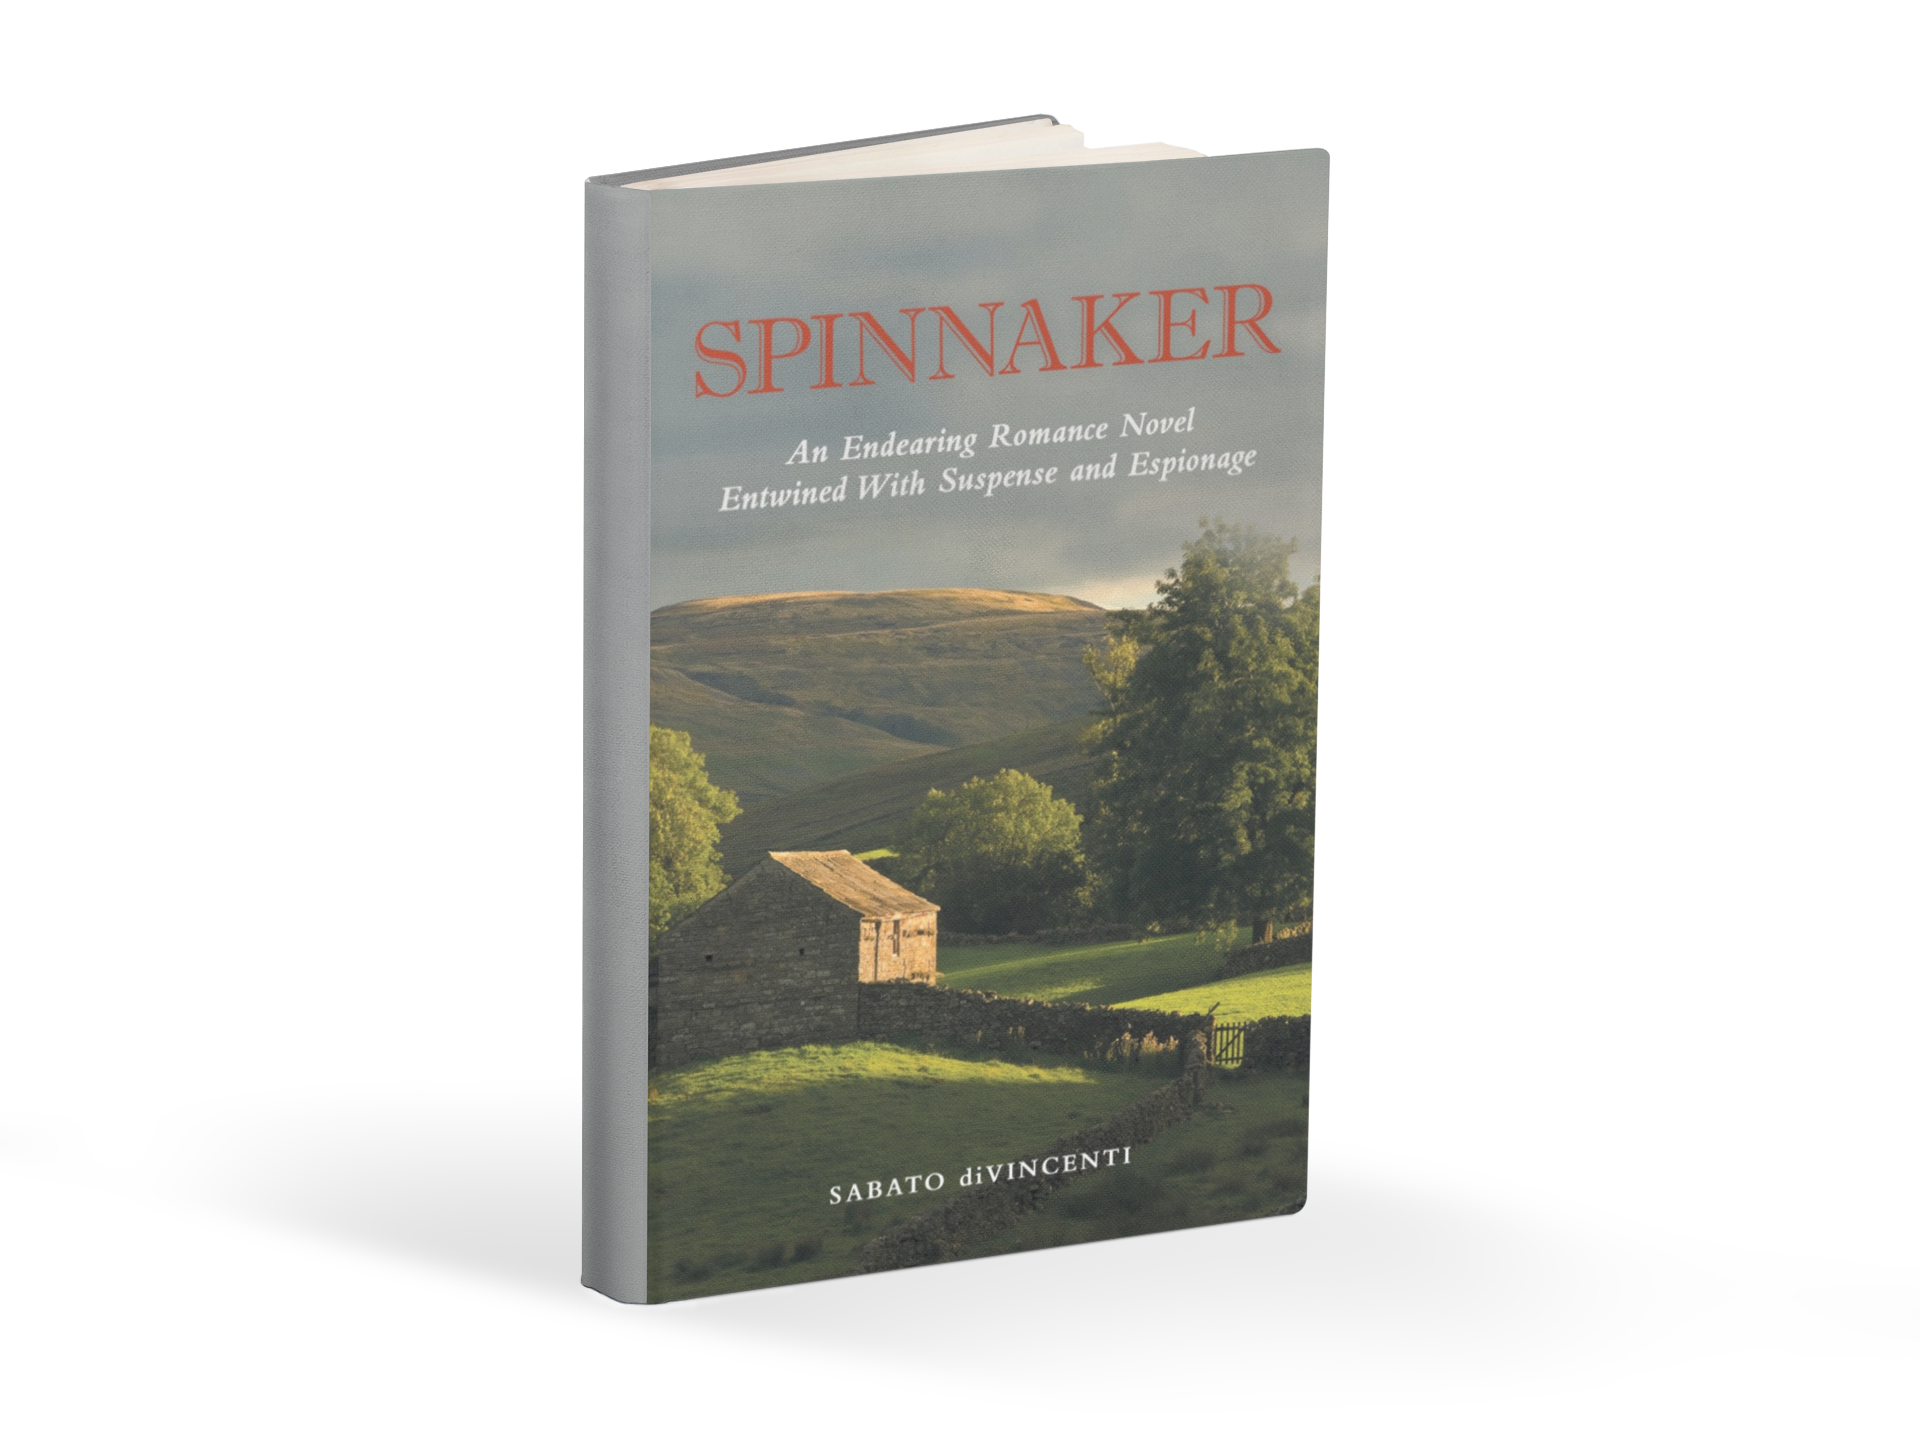 SPINNAKER by Sabato diVincenti - An Endearing Romance Novel Entwined With Suspense and Espionage is a Visionary Historical Romance Filled with Masterful Twists and Turns